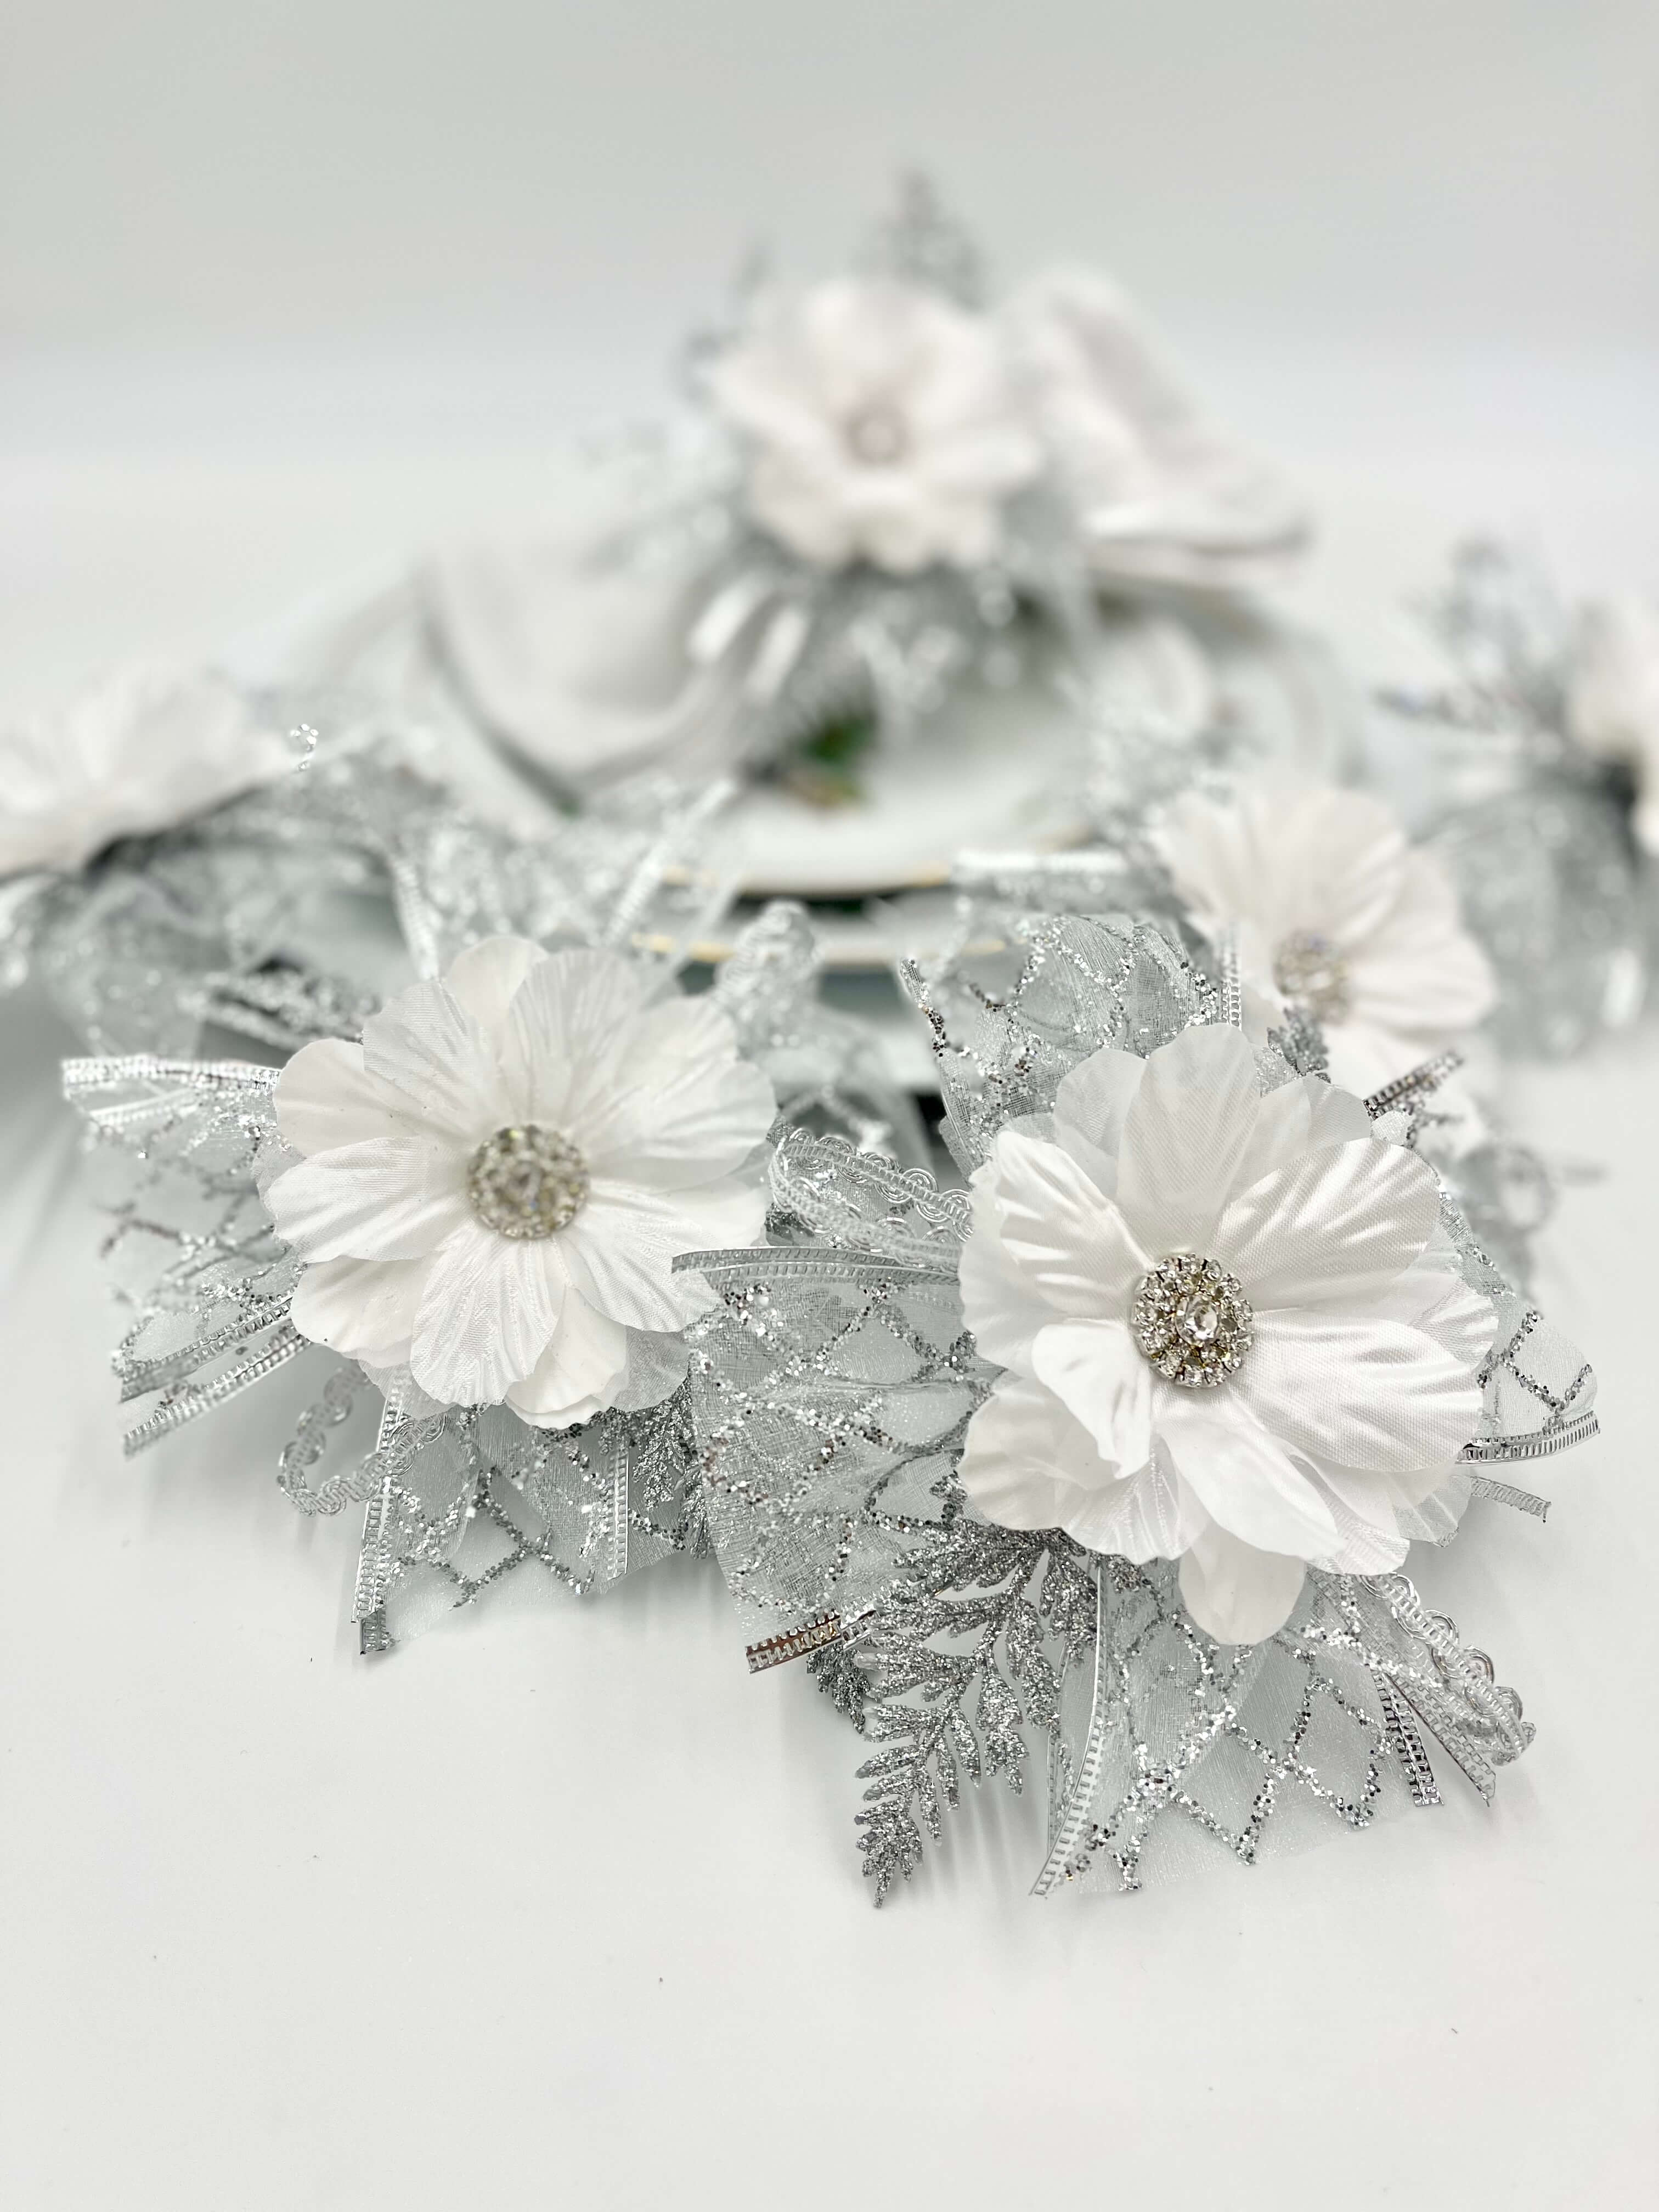 Napkin Ring Holidays And Christmas Home Decor; White And Silver Decor. Perfect Holidays Gift Idea For Friend, Mother, Teacher. Elegant Decor